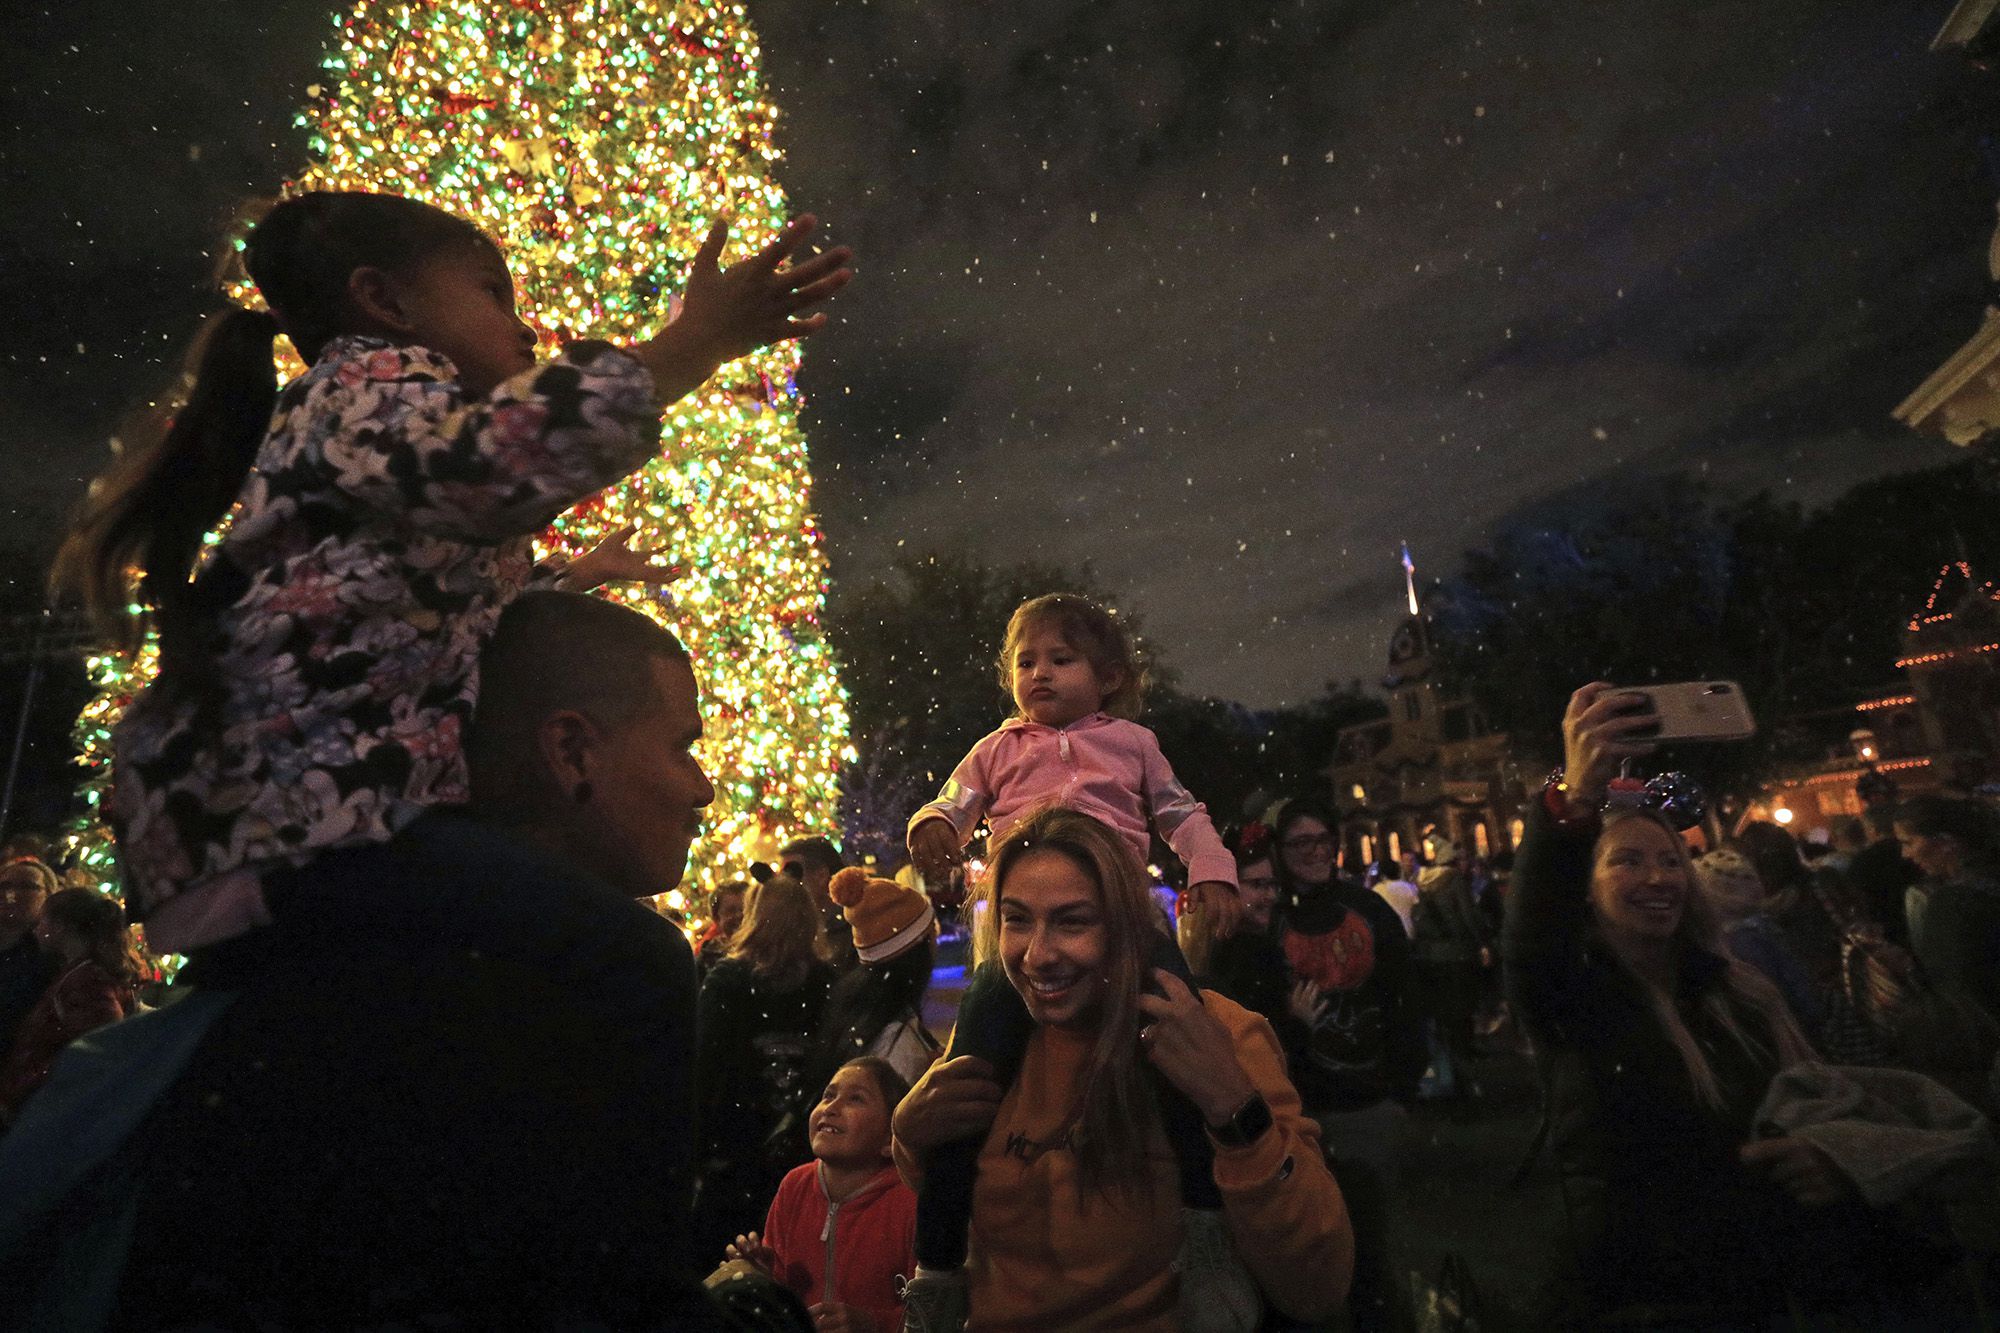 Tino Liquigan, left, and wife Raquel with their daughters amid the falling 'snow' on Disneyland's Main Street on Nov. 21, 2019 in Anaheim, Calif. (Myung J. Chun/Los Angeles Times/TNS)